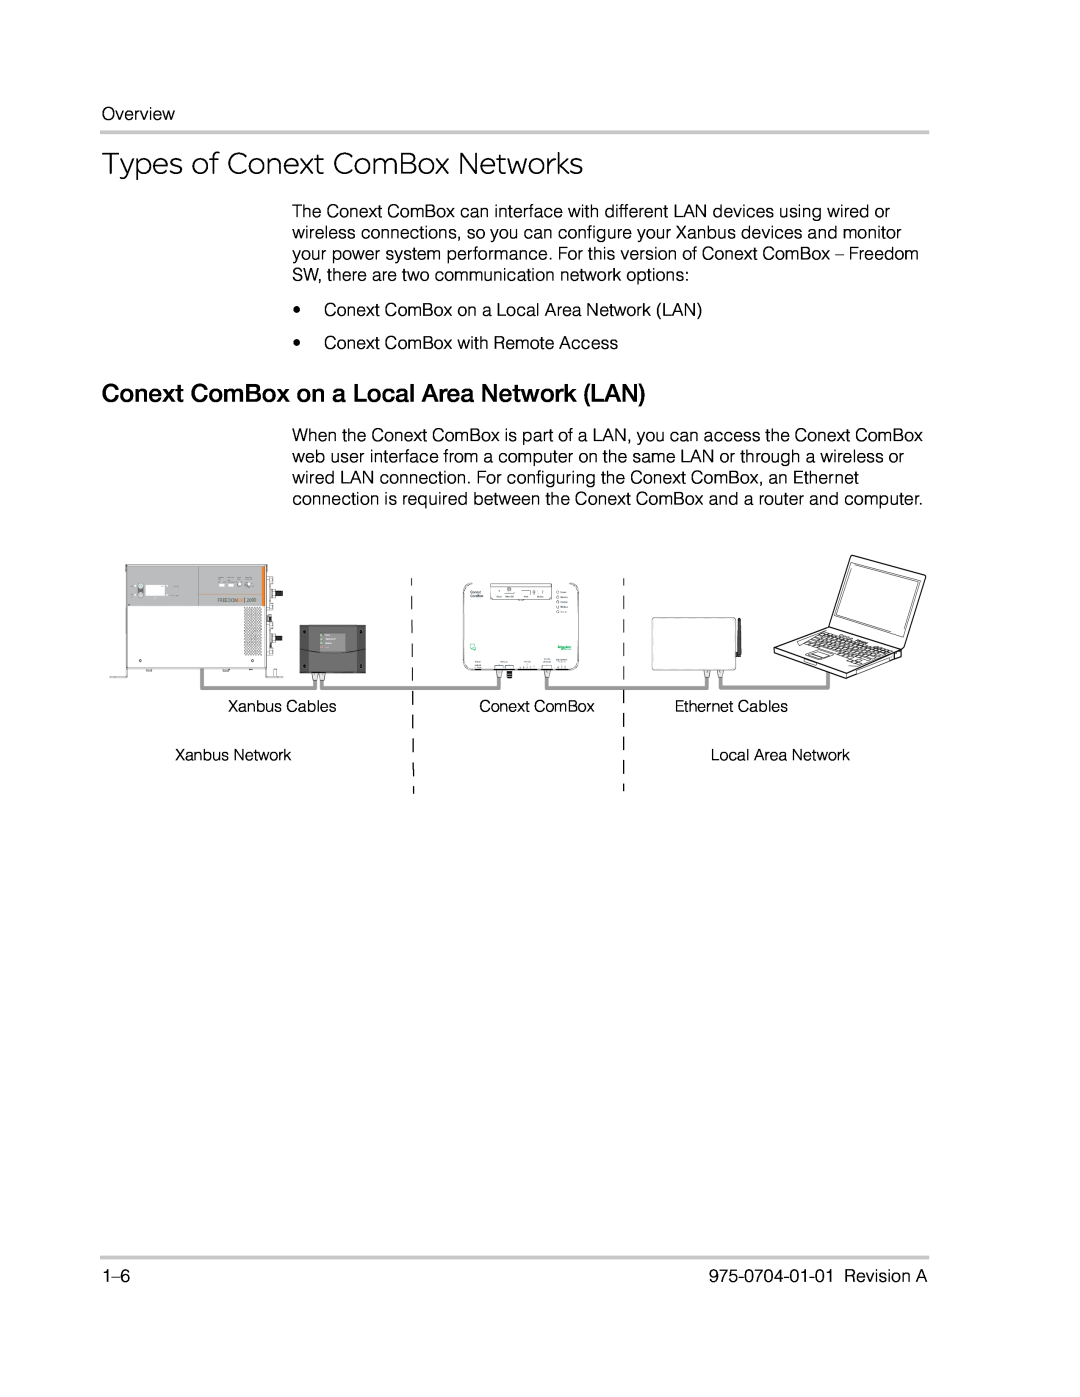 Xantrex Technology Freedom SW Series manual Types of Conext ComBox Networks, Conext ComBox on a Local Area Network LAN 